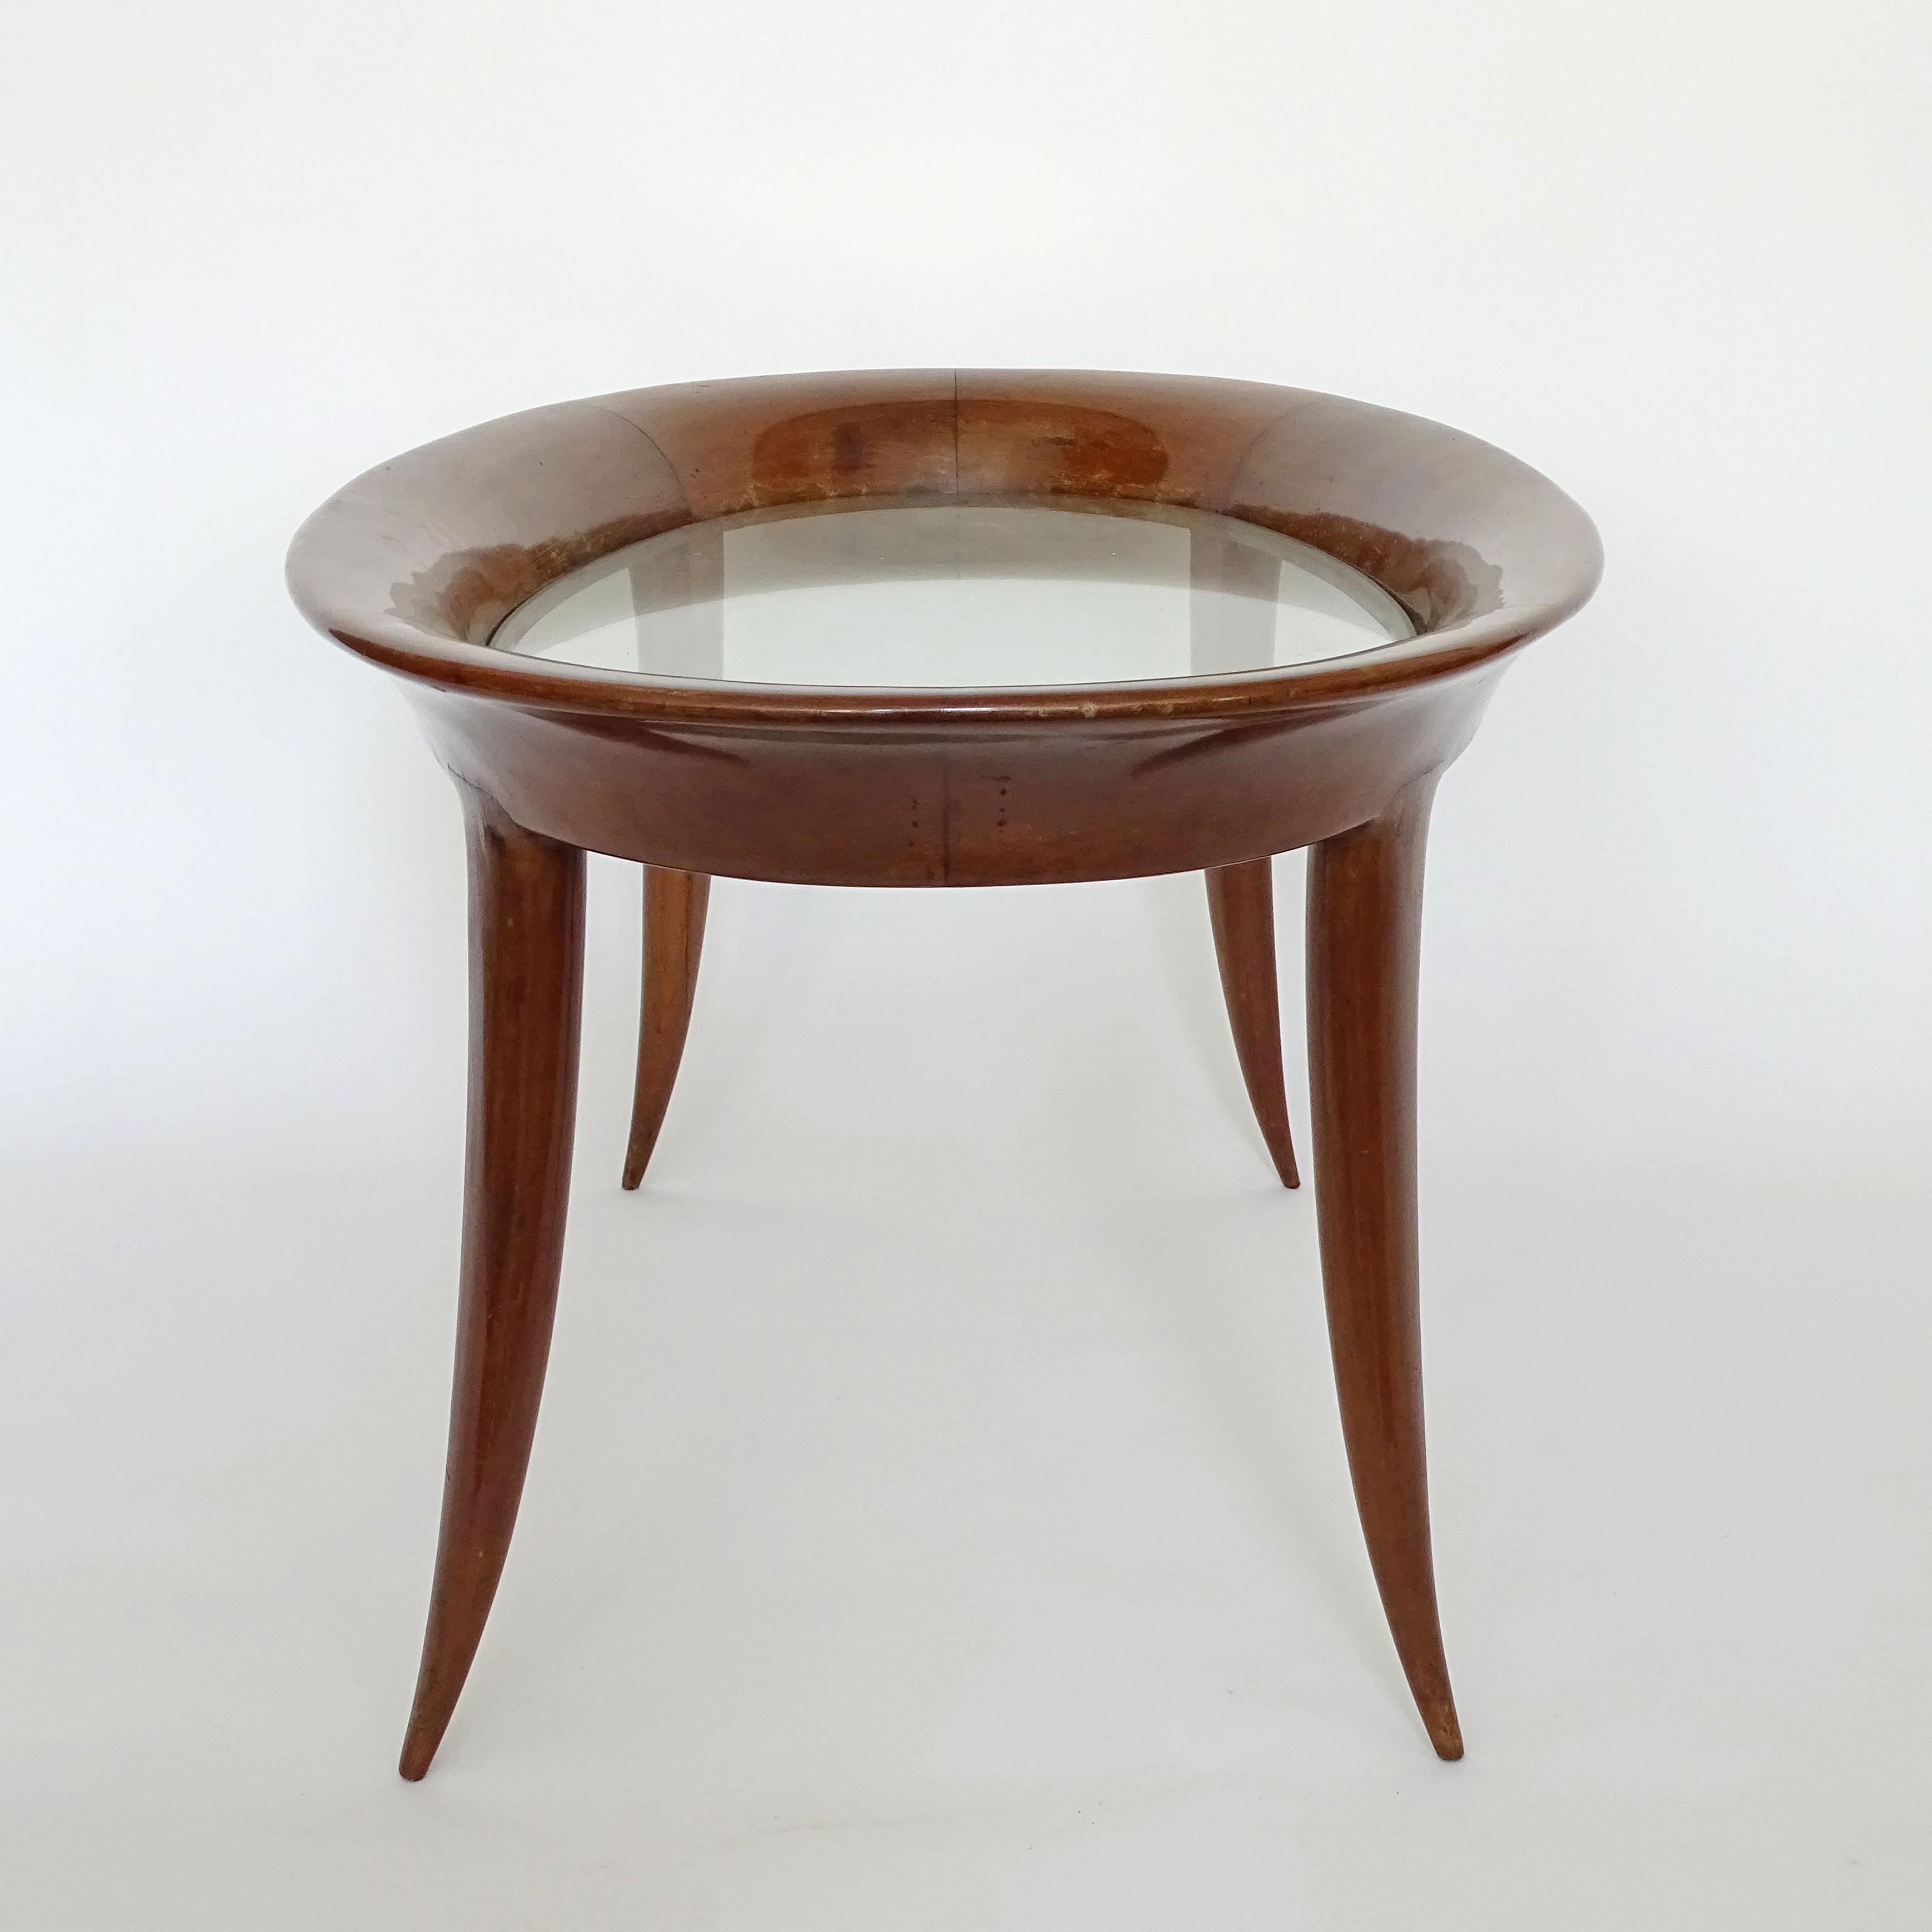 Italian 1940s Sculpted Oval Coffee Table Attributed to Fontana Arte For Sale 5